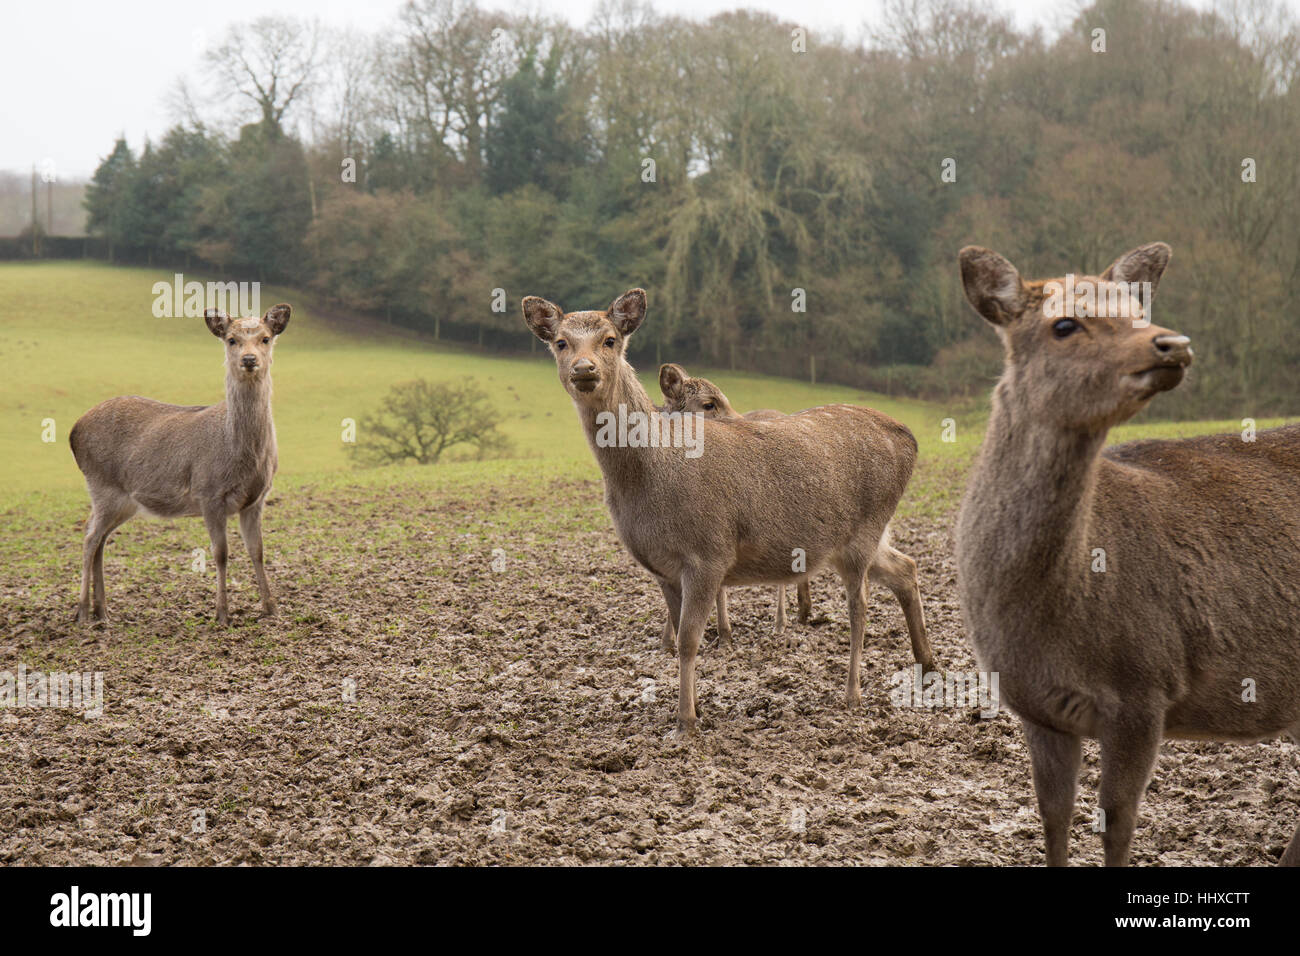 4 small deer standing in a muddy / grassy field Stock Photo